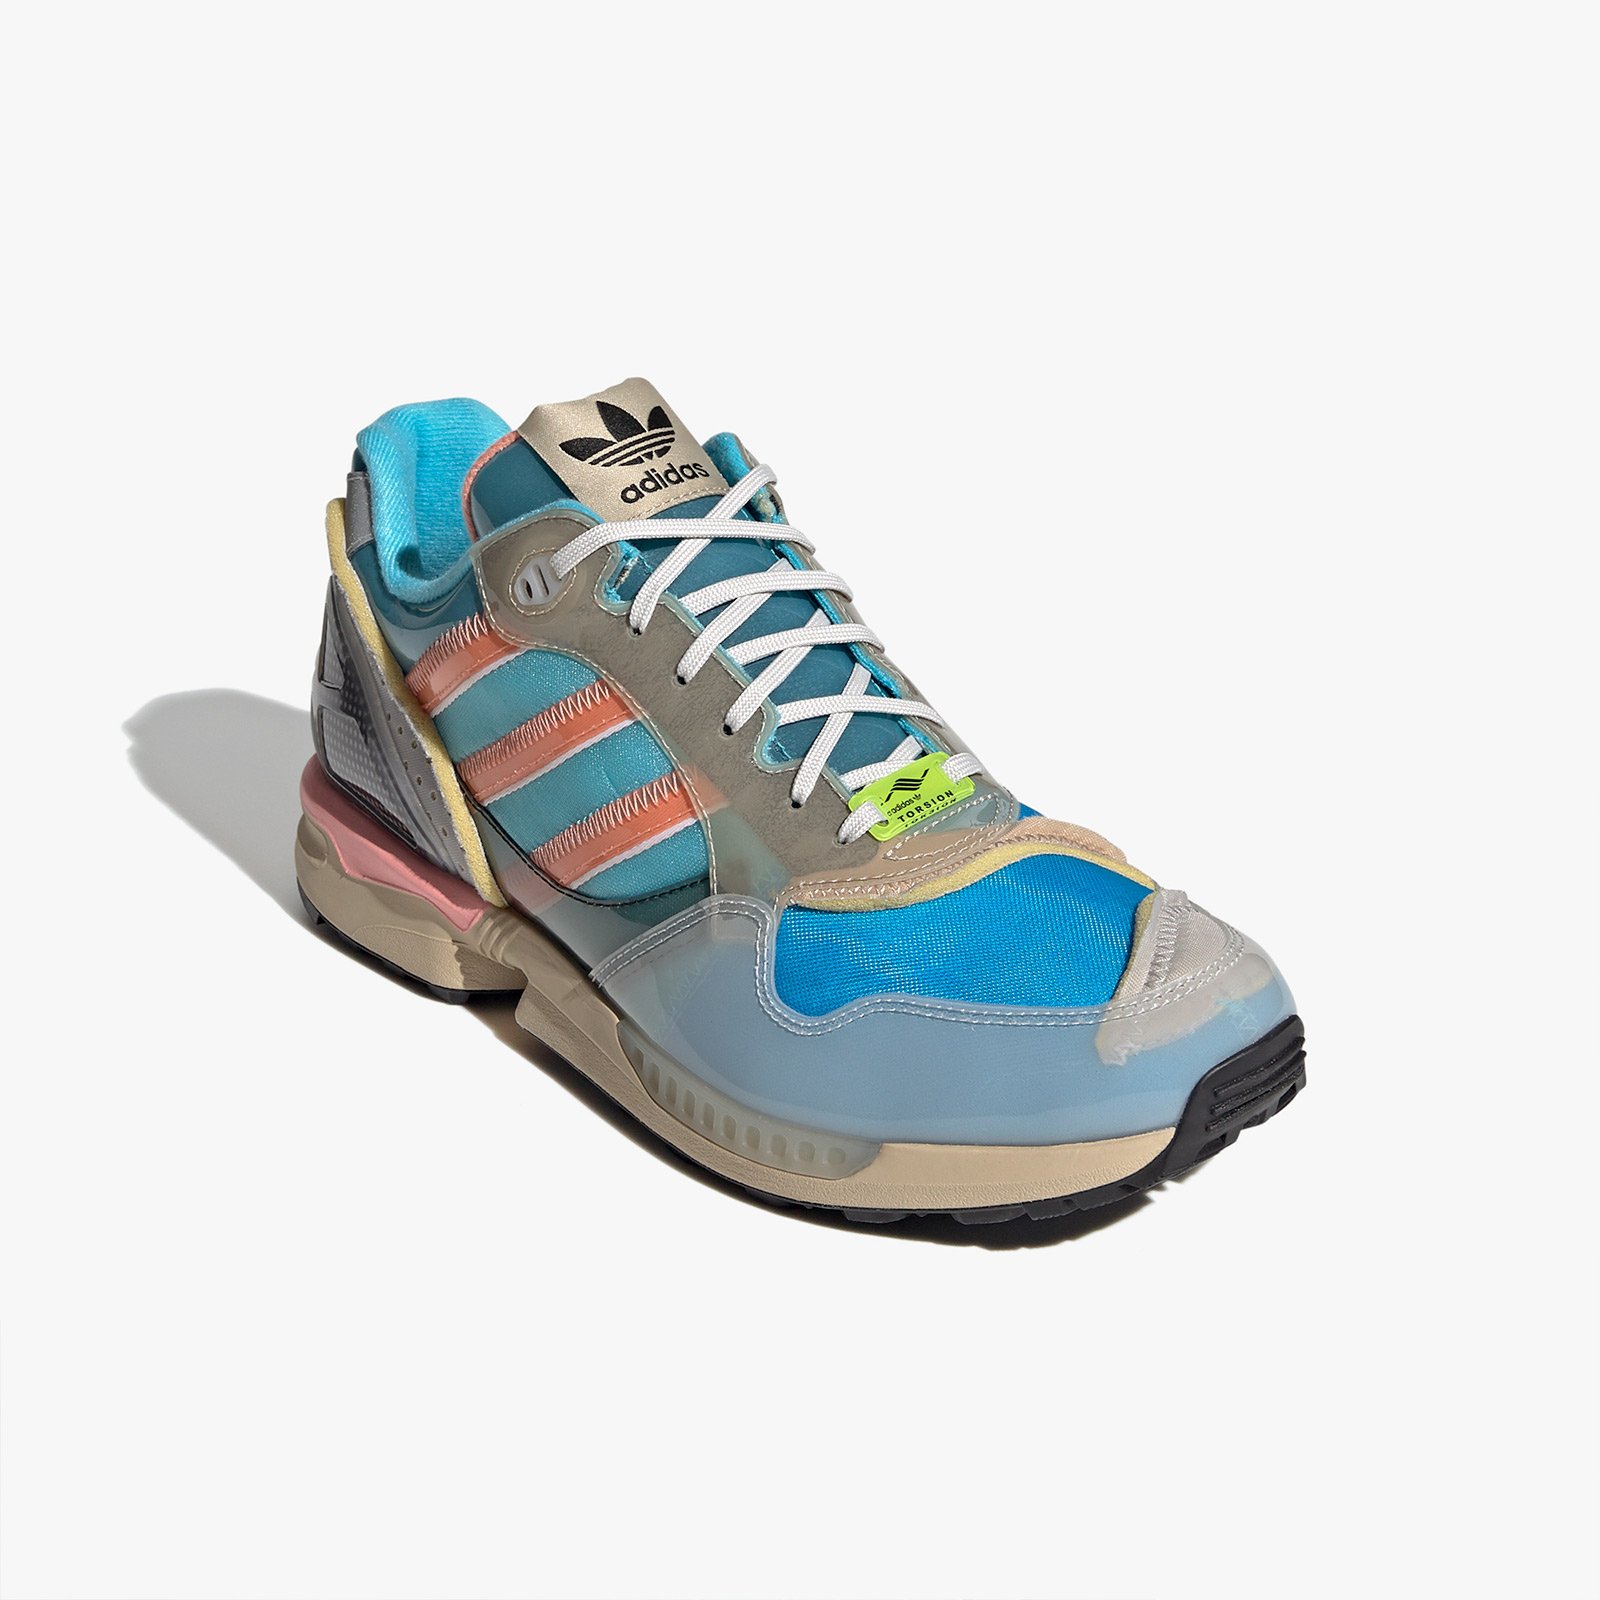 adidas zx 6000 inside out